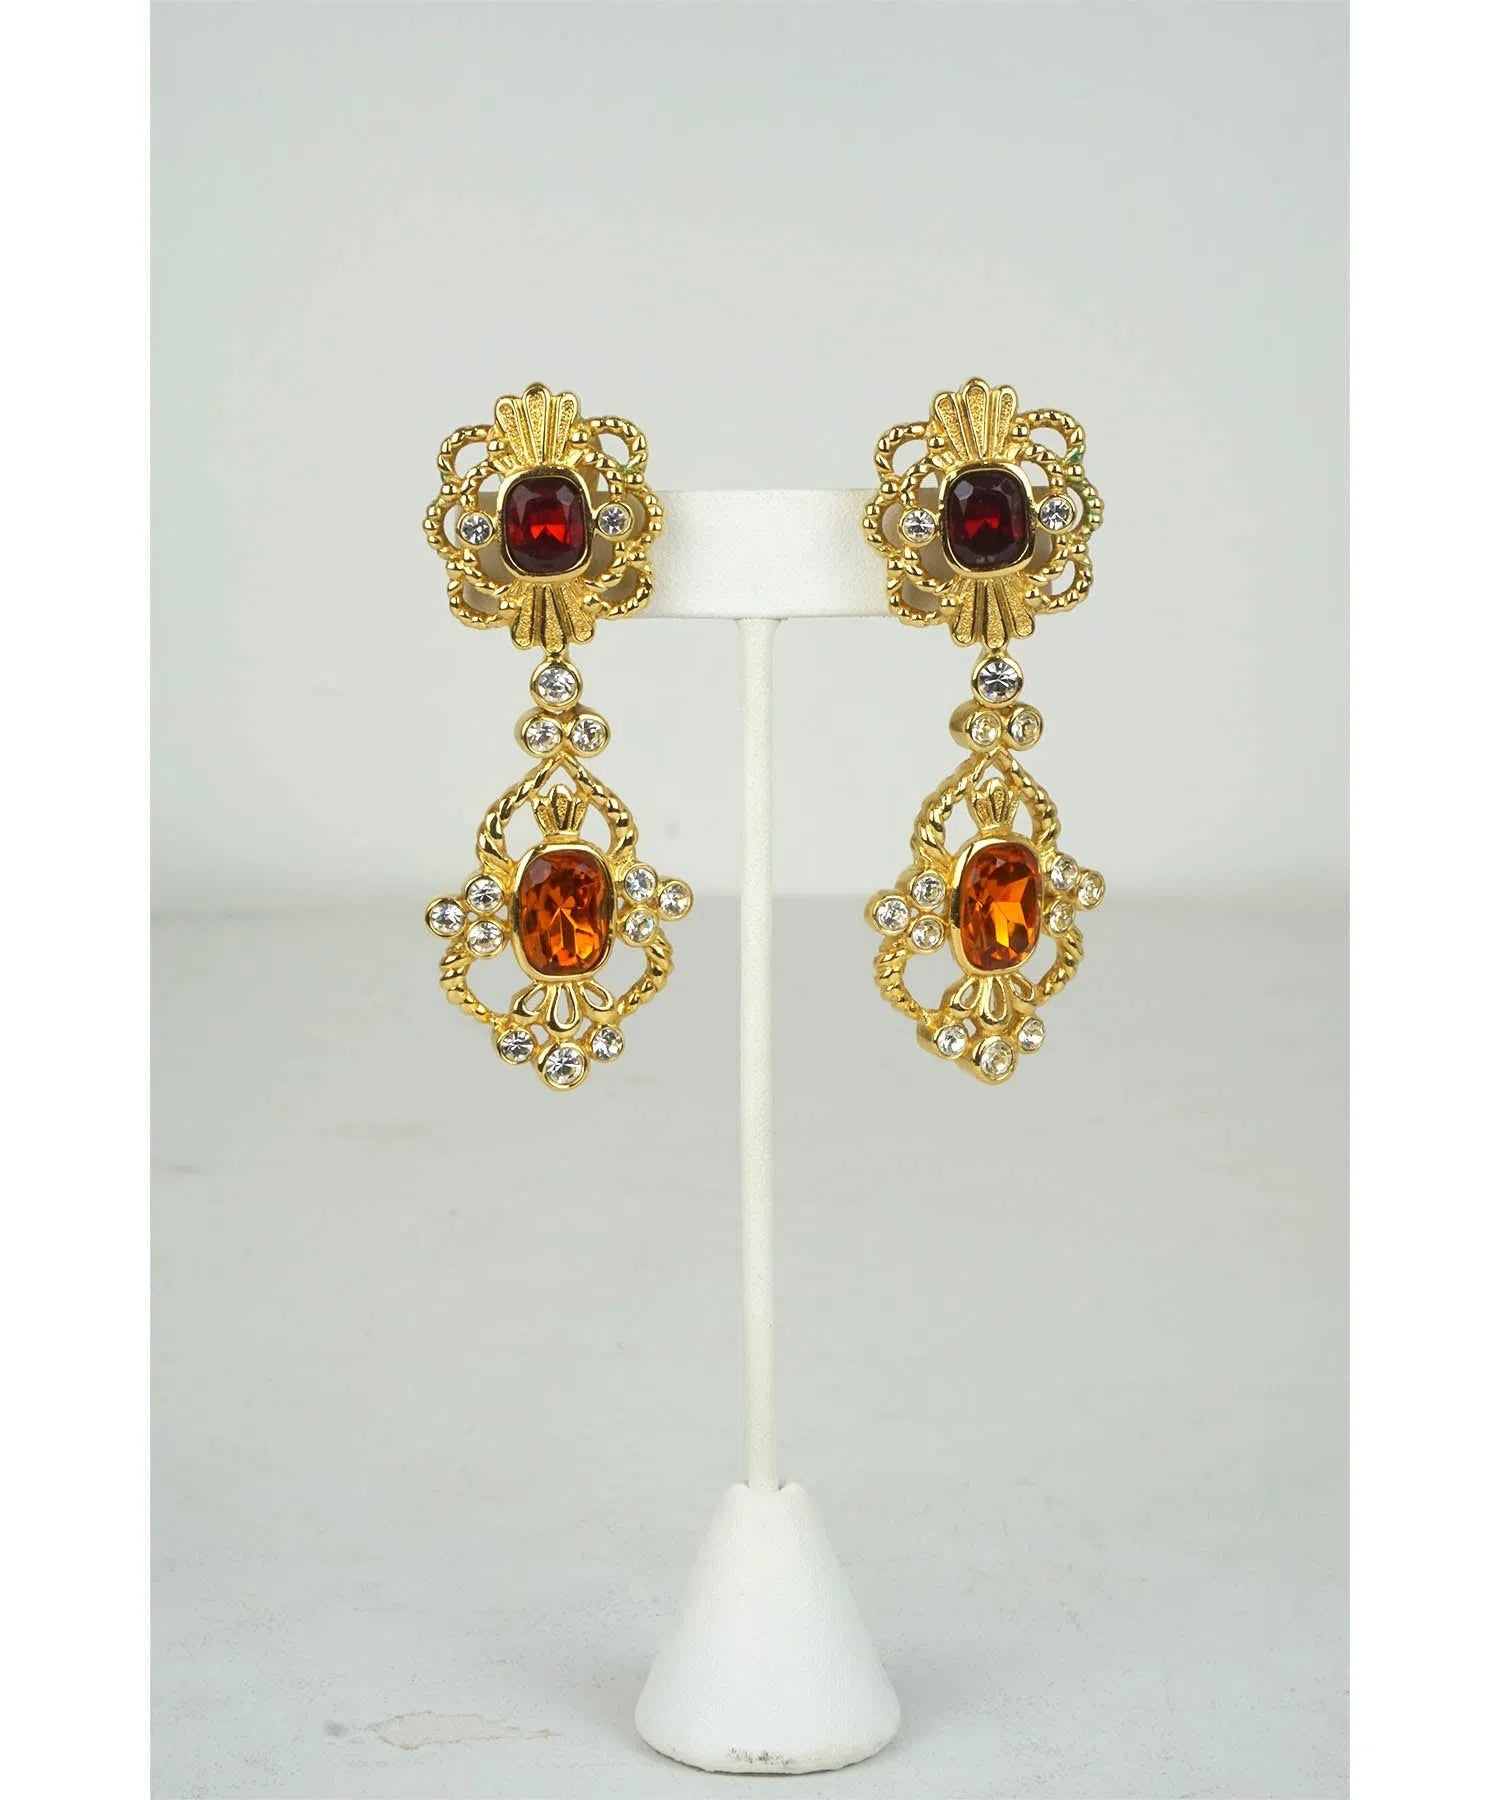 Christian Dior Rare Vintage Crystal Embellished Earrings 1960's-1970's - Foxy Couture Carmel